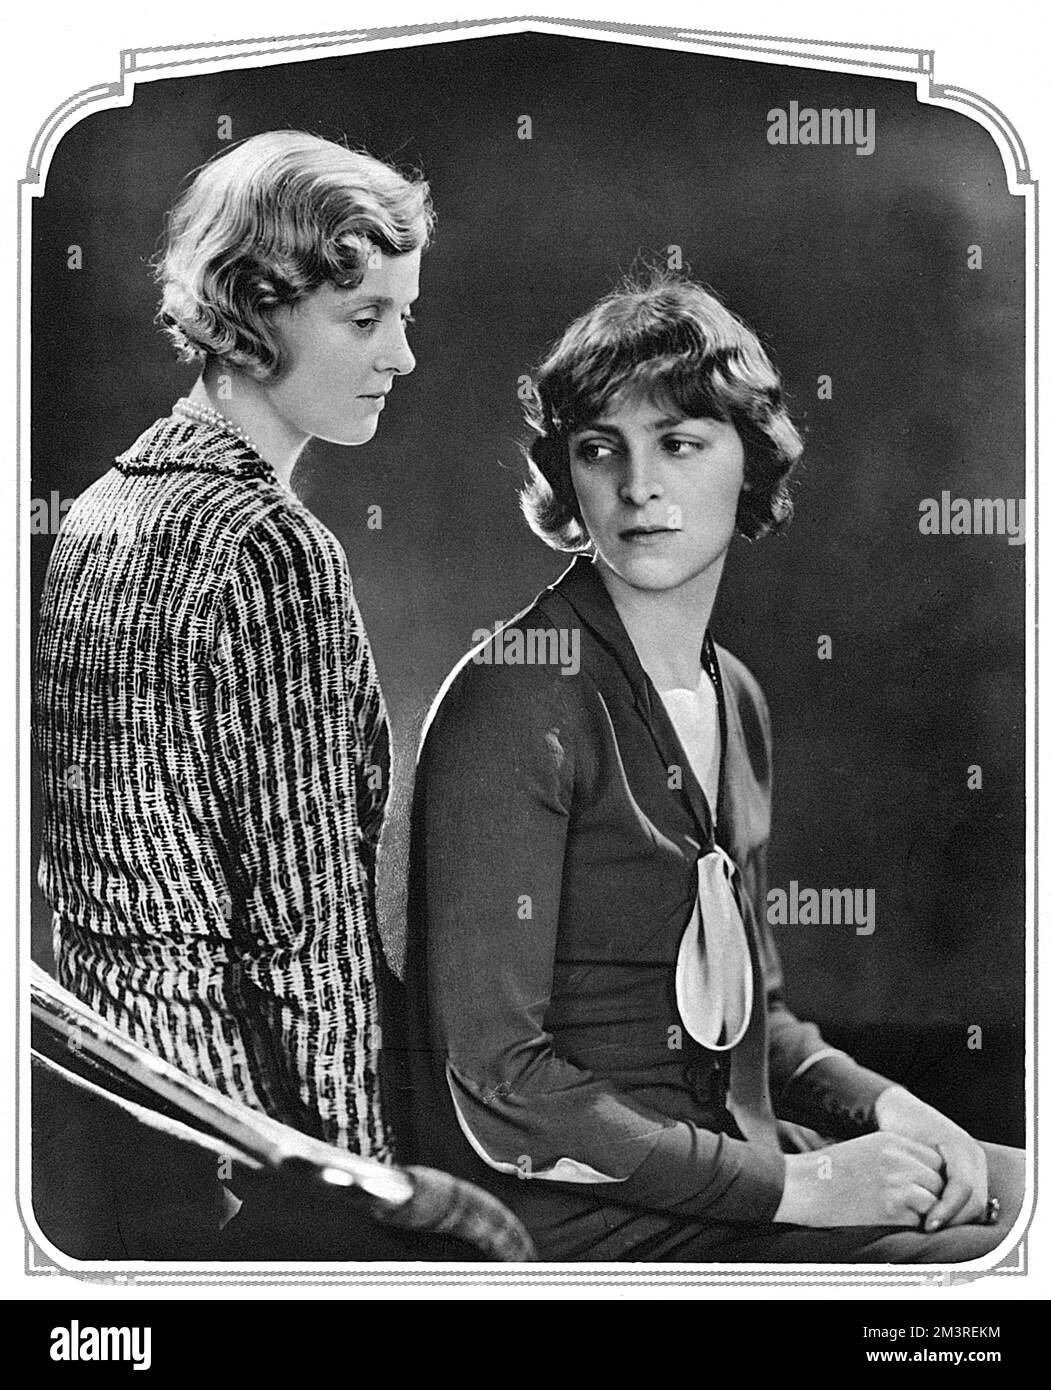 Mrs Arthur James, Zita Jungman seen on the right (1904-2006) and her younger sister, Teresa 'Baby' Jungman, later Mrs Cuthbertson (1908-2010), daughters of Dutch painter Nico Jungman and Beatrice Mackay, later Mrs Richard Guinness.  The sisters were pivotal members of the Bright Young People during the 1920s.      Date: 1933 Stock Photo